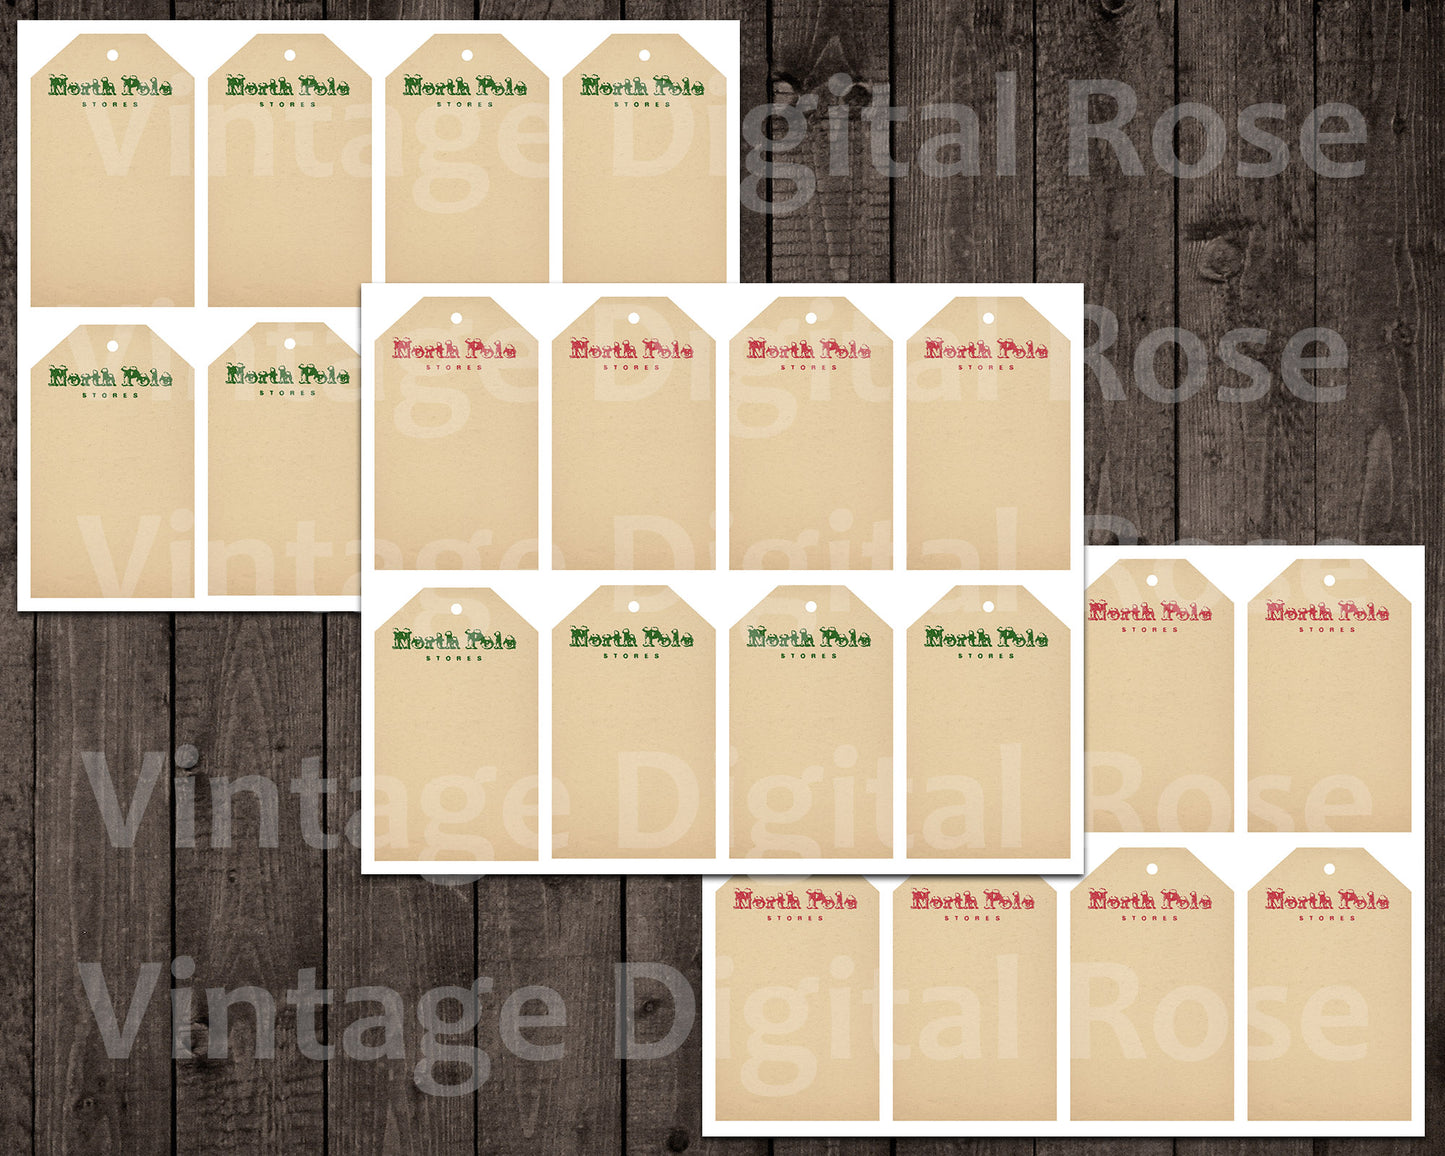 Vintage North Pole Stores Christmas Gift Tags Red and Green - Printable Digital Tags Set of 2 Tags